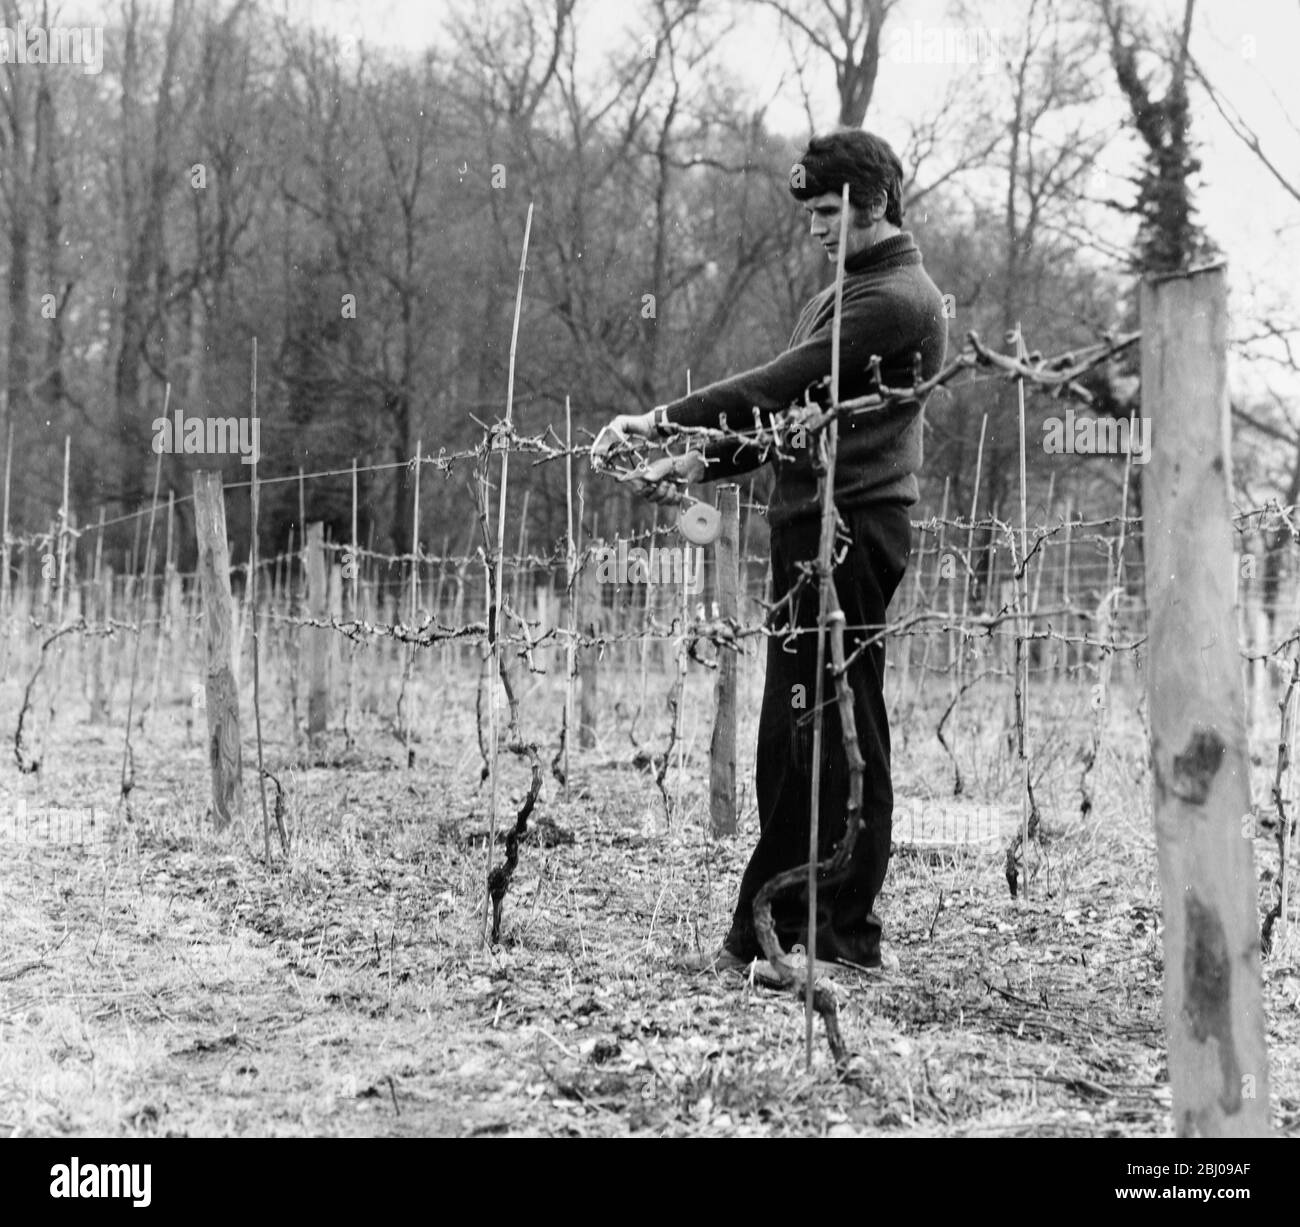 Pruning and Training Vines - Bob Hollister tying up Reichensteiner vines with the Max Tapener Gun which speeds up the work. The 3/4 acre plot was planted in 1972. An acre of wines should produce 3 tons of grapes to make 1000 battles of wine. Stock Photo